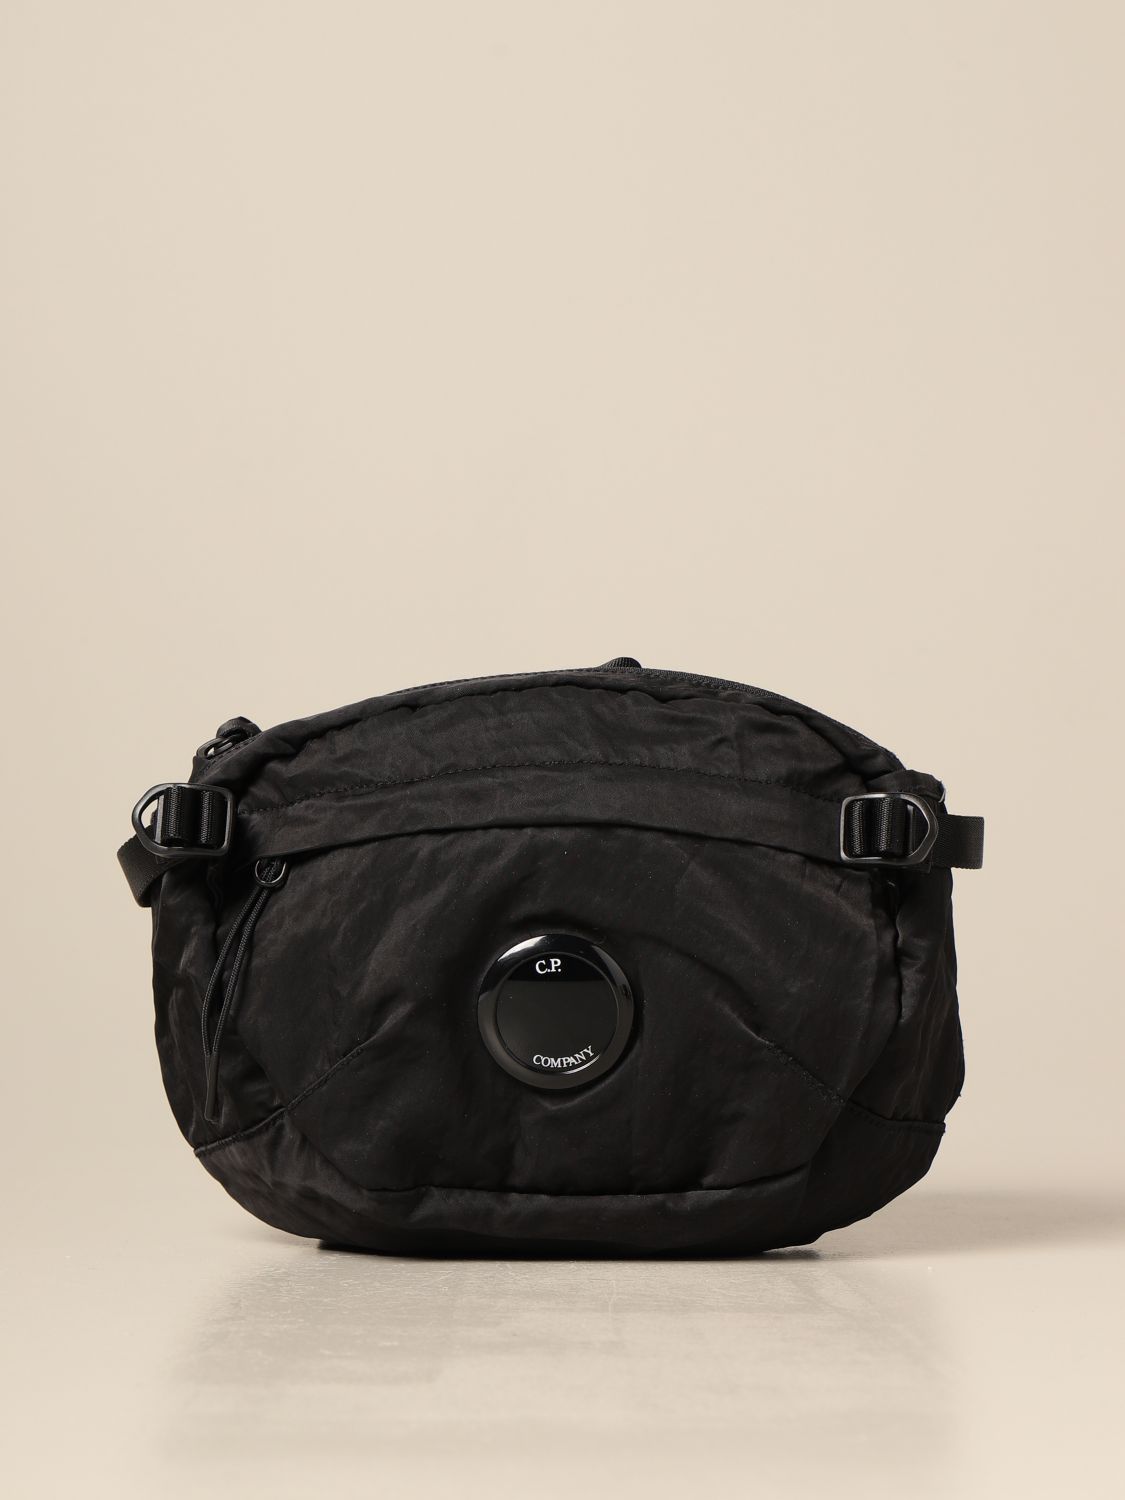 Cp Company Bag Top Sellers, 53% OFF | empow-her.com